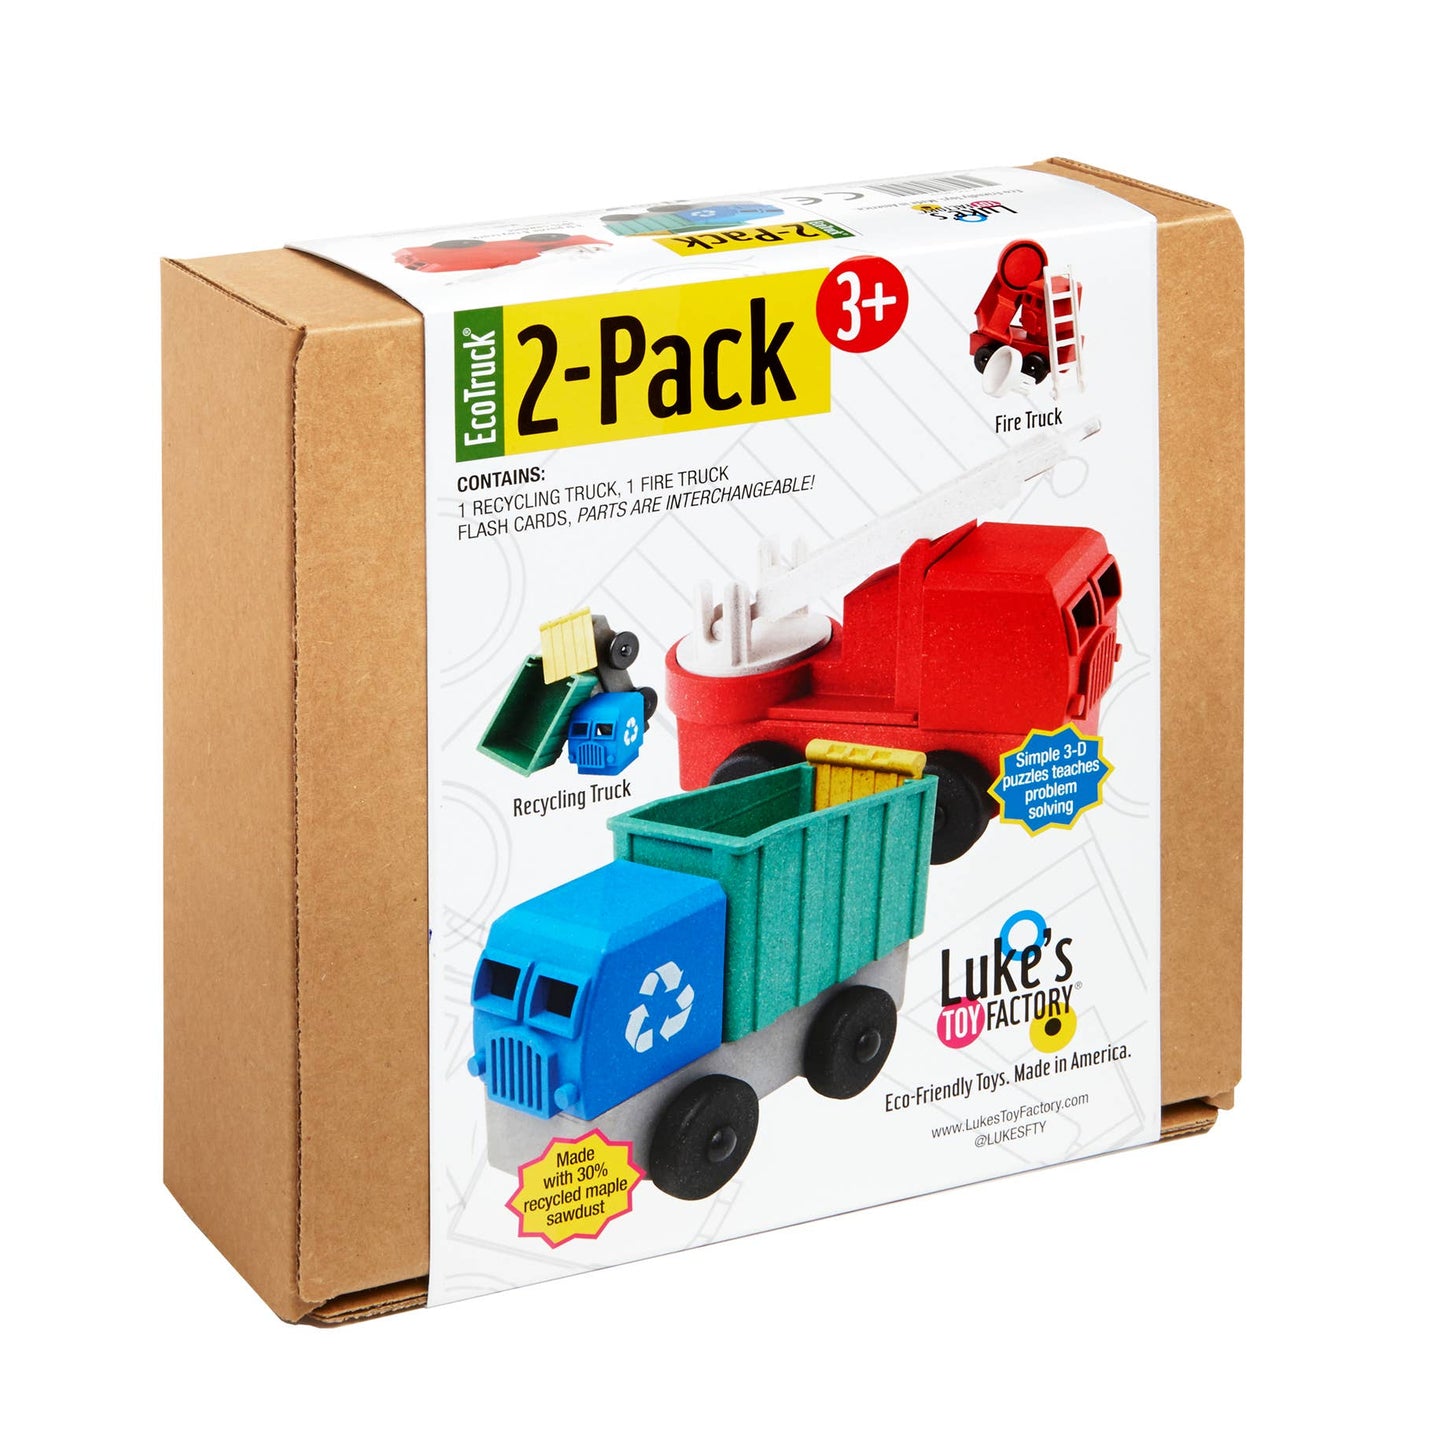 Fire and Recycling Truck 2 Pack